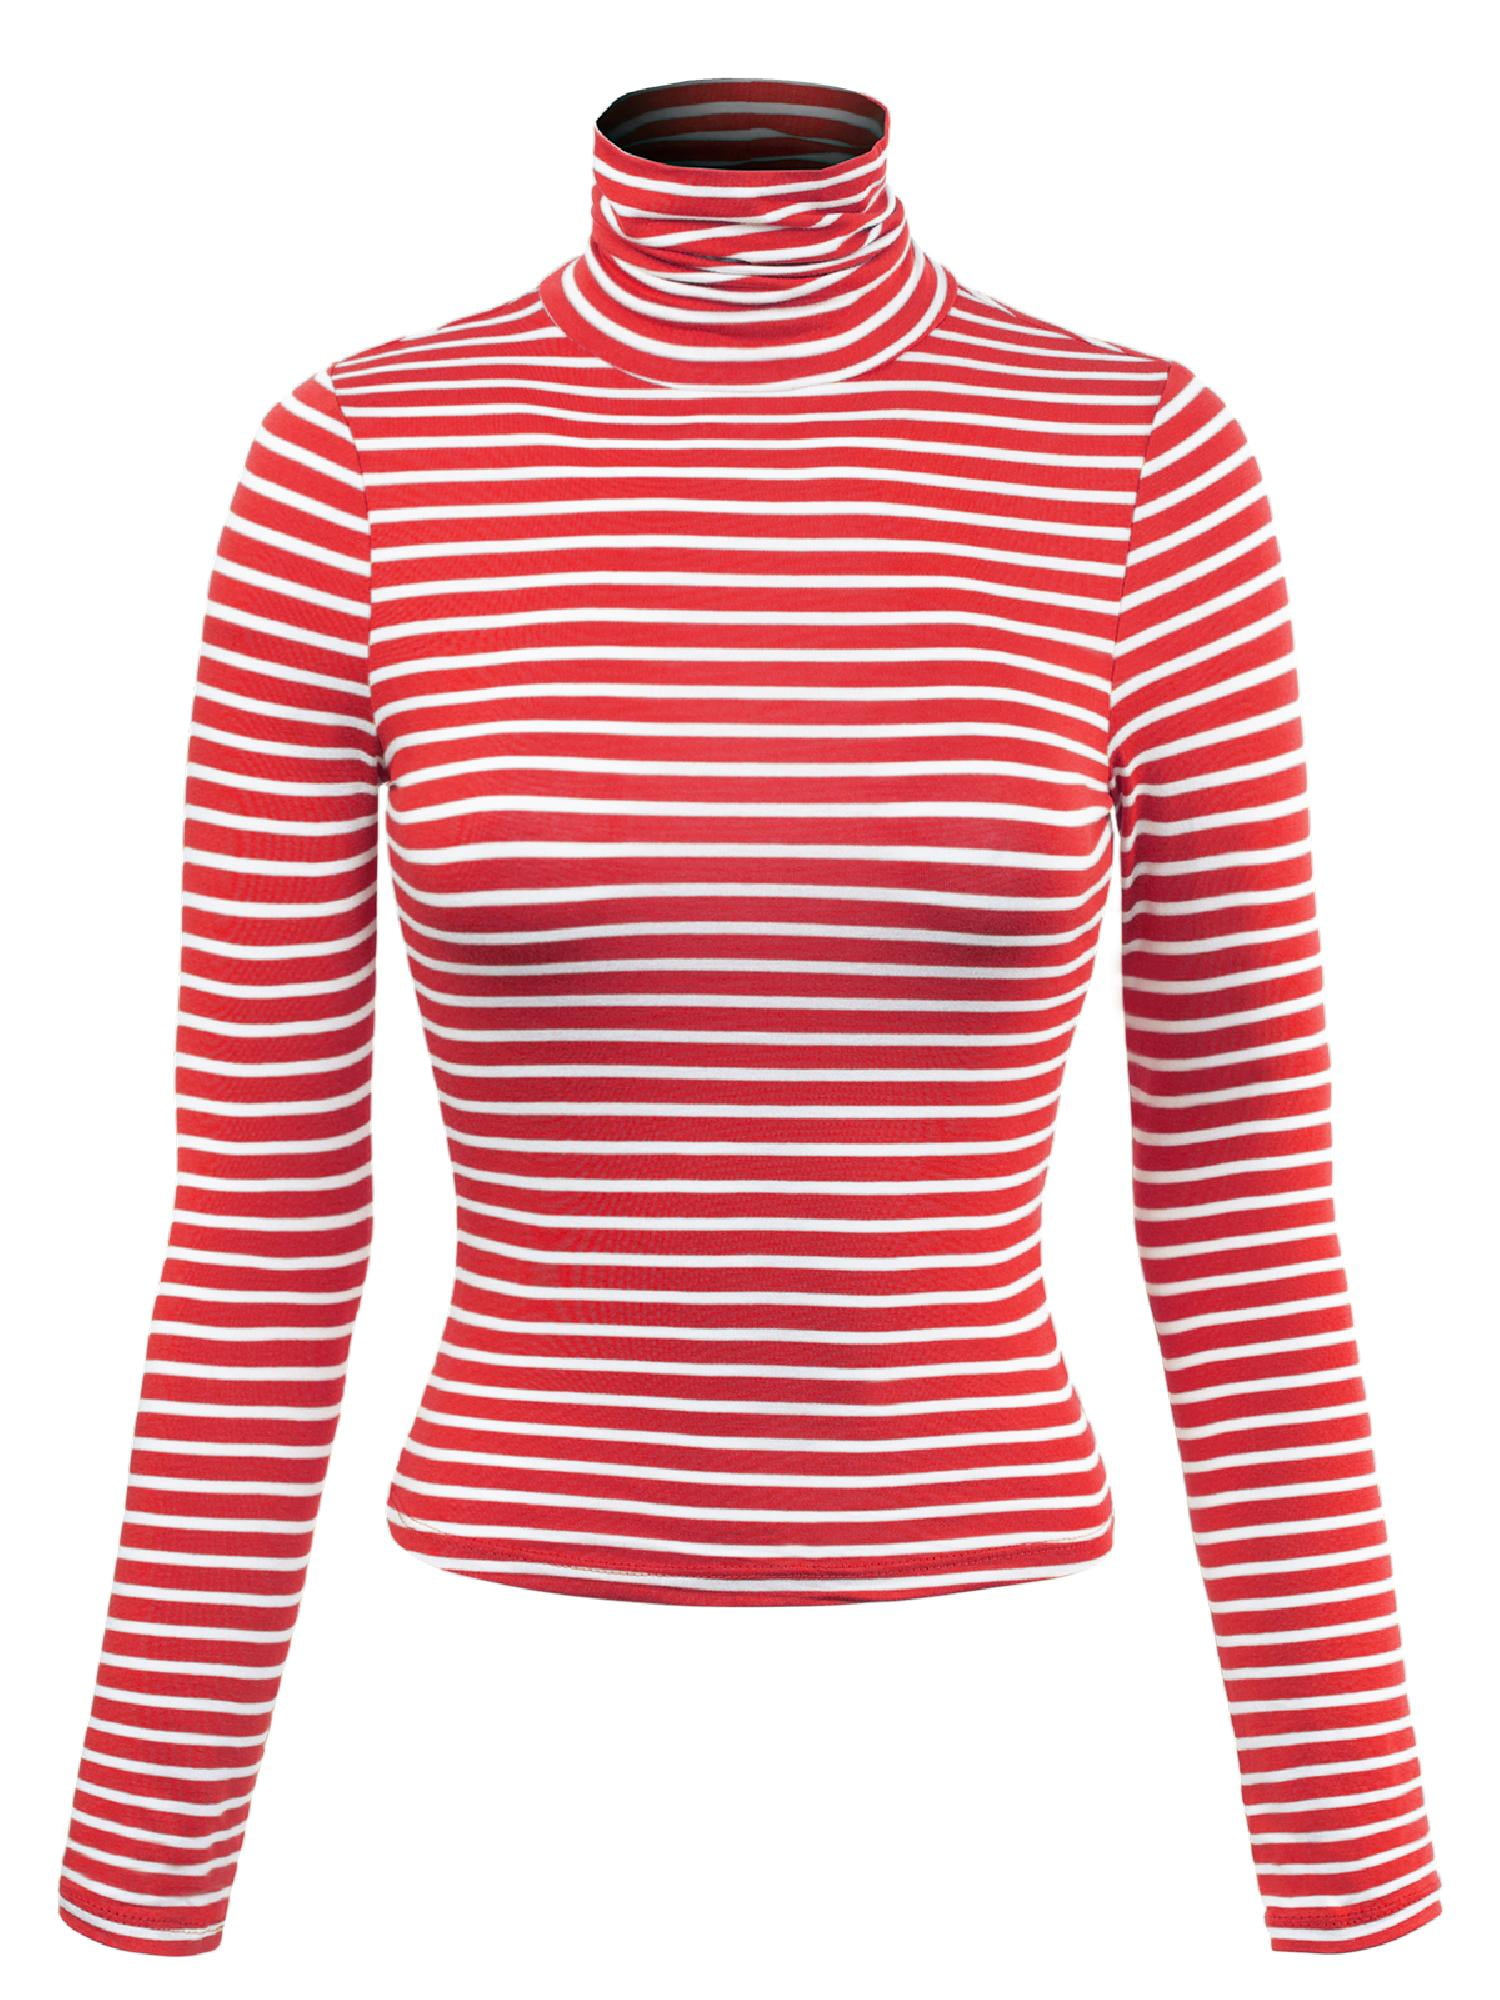 MixMatchy Women's Tight Fit Lightweight Solid/Stripe Long Sleeves Turtle Neck Top 